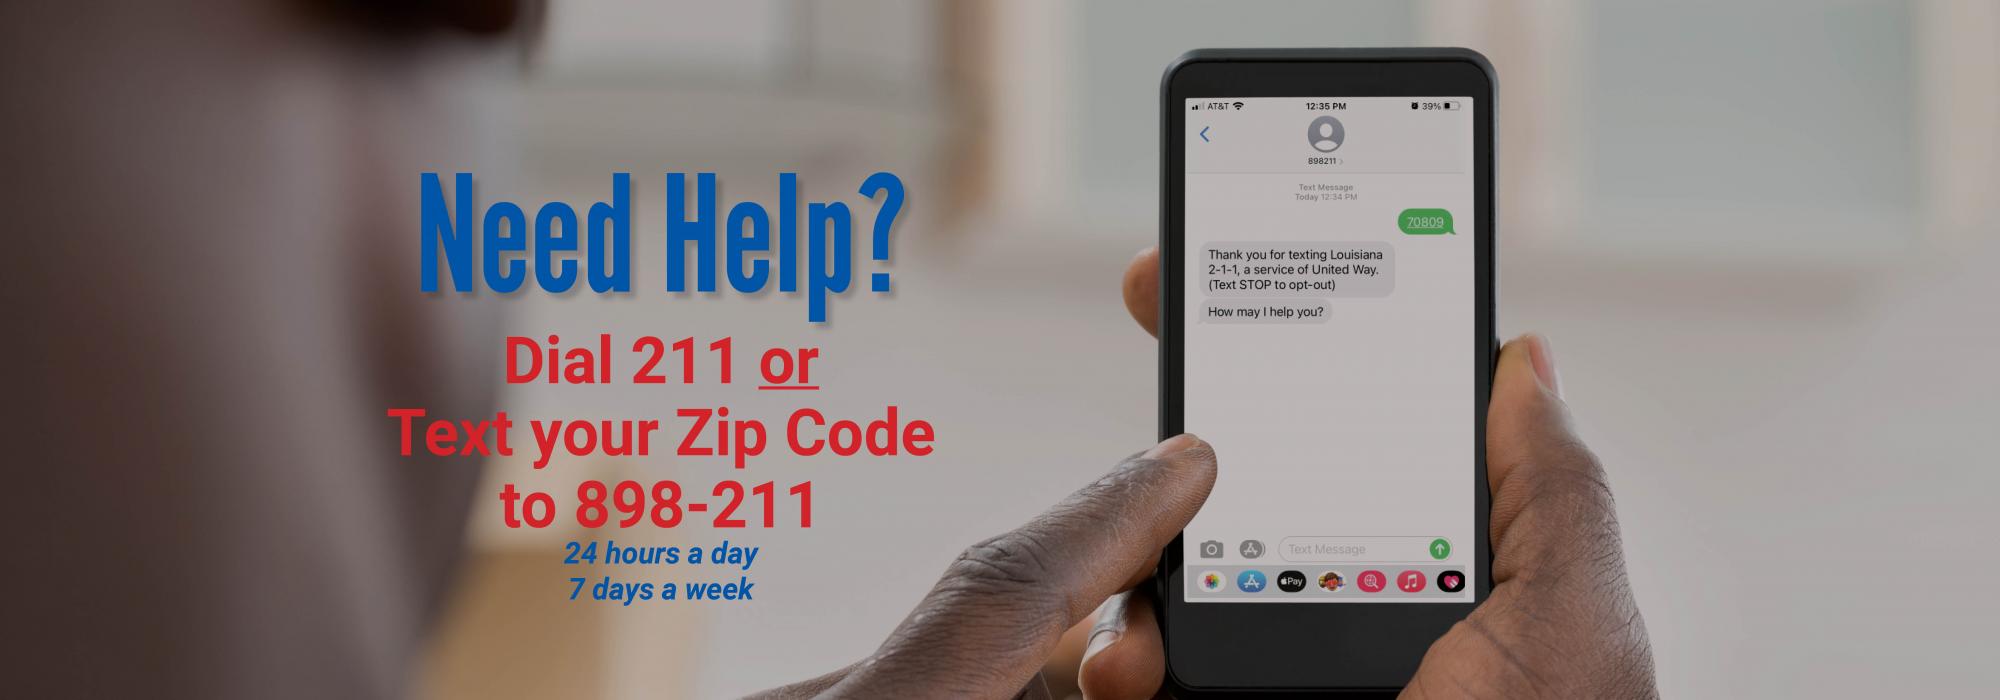 Need Help? Dial 211 or Text your Zip Code to 898-211